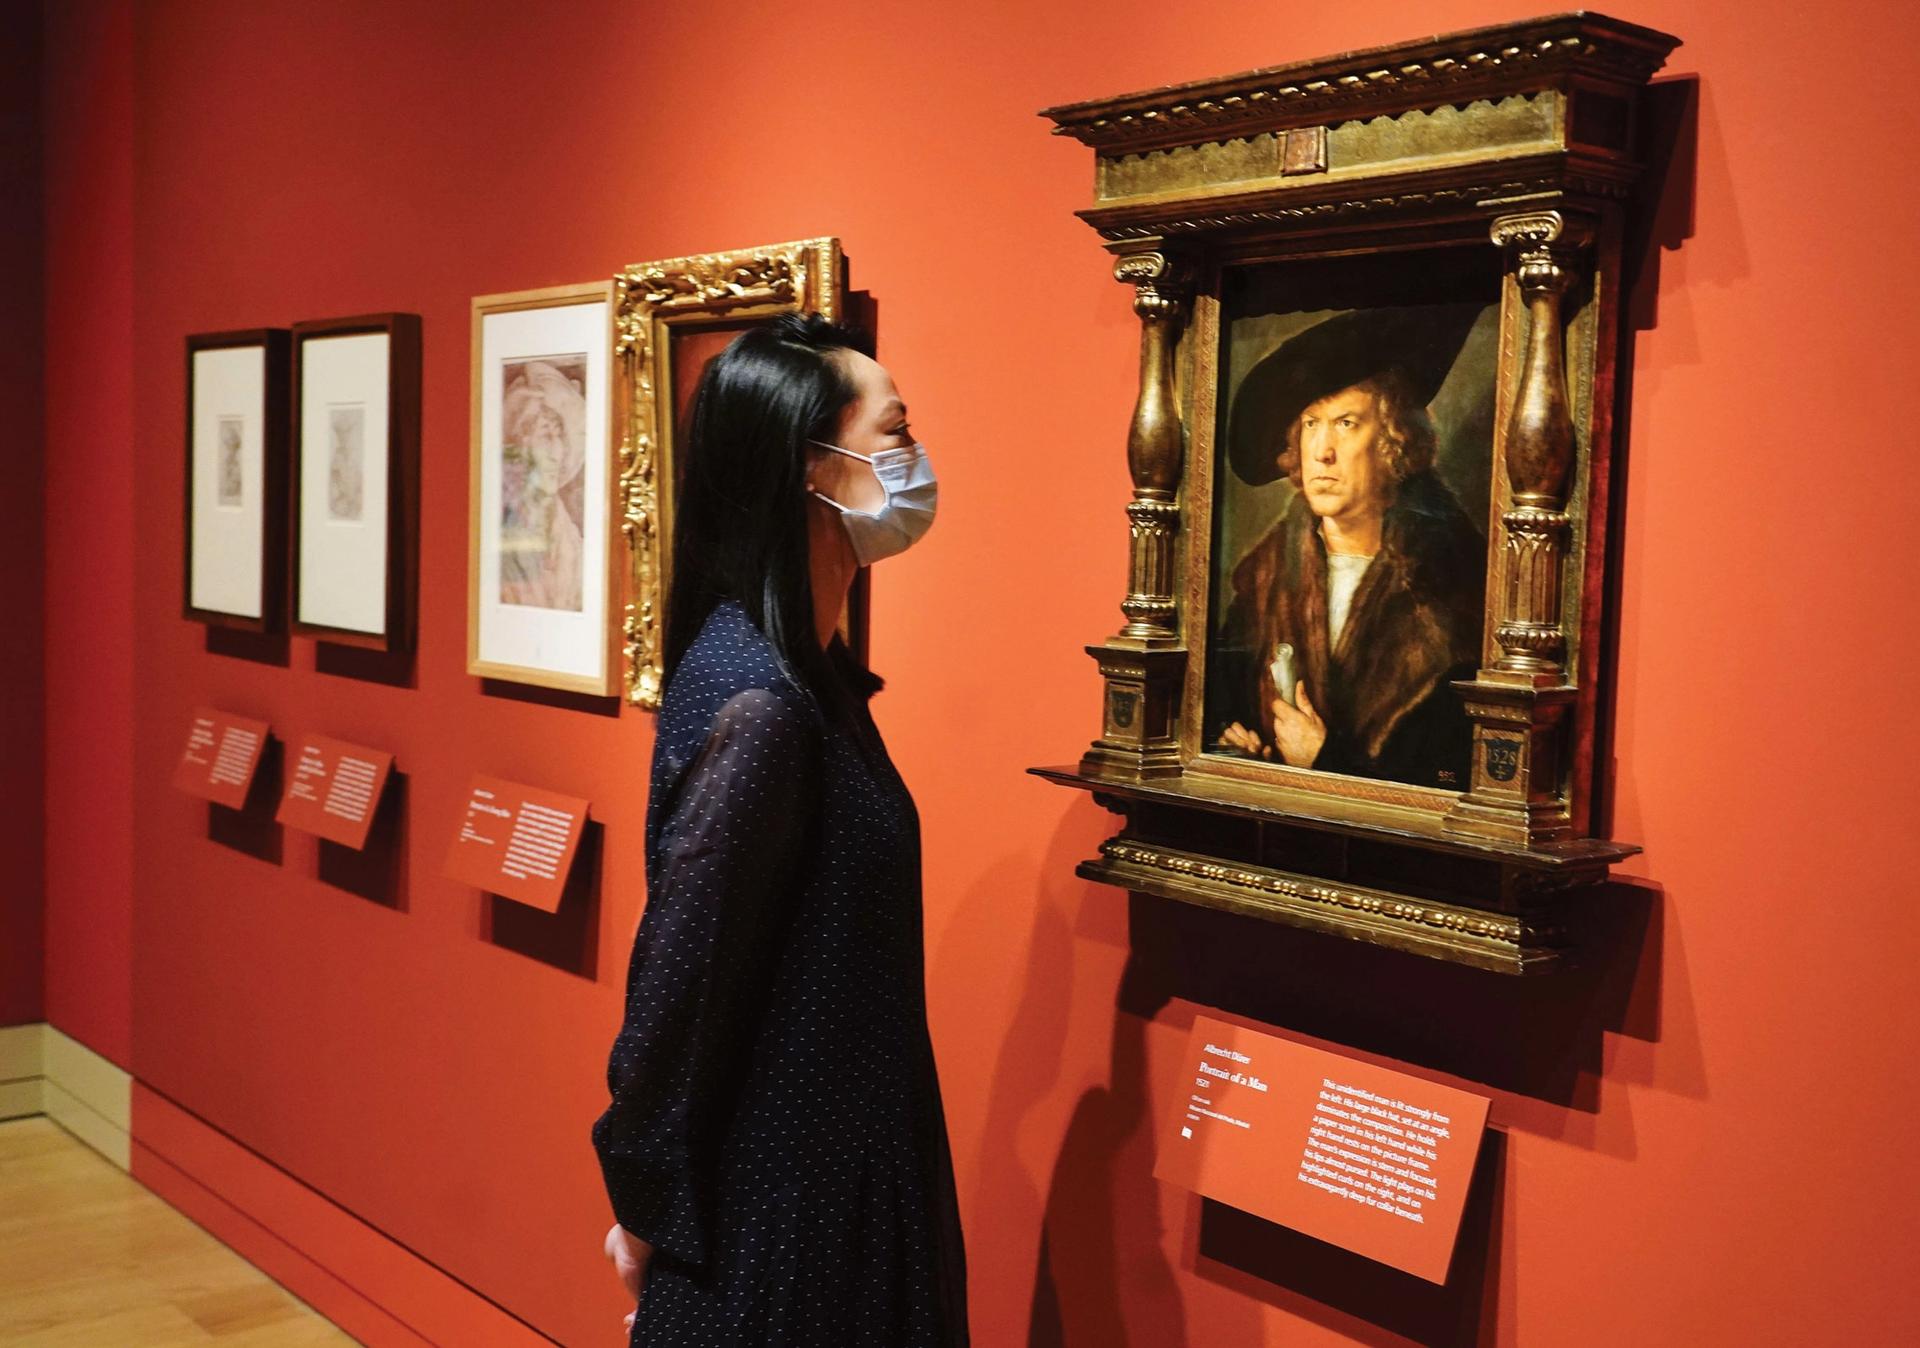 Dürer’s Portrait of a Man (1521) in the exhibition: “such is Dürer’s magic that these bread-and-butter commissions transcend the formulae of formal portraits with odd quirks” Photo: Ian West/PA Images via Getty Images